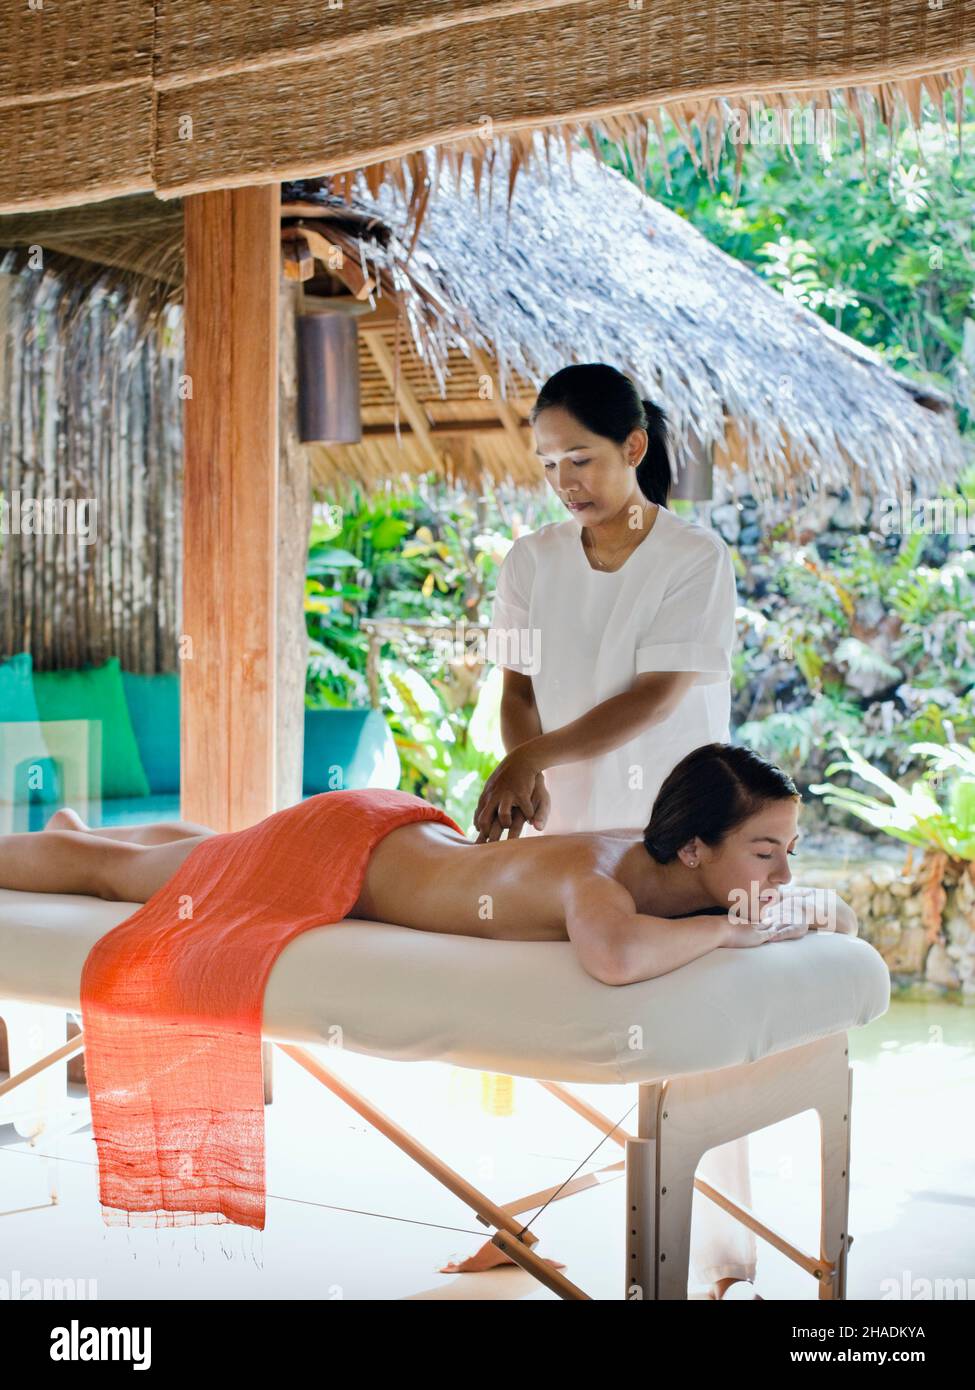 A woman receives a Fusion Massage at Six Senses Spa. The Fusion Massage is an 80-minute treatment combining Swedish, Thai, Aroma therapy Stock Photo